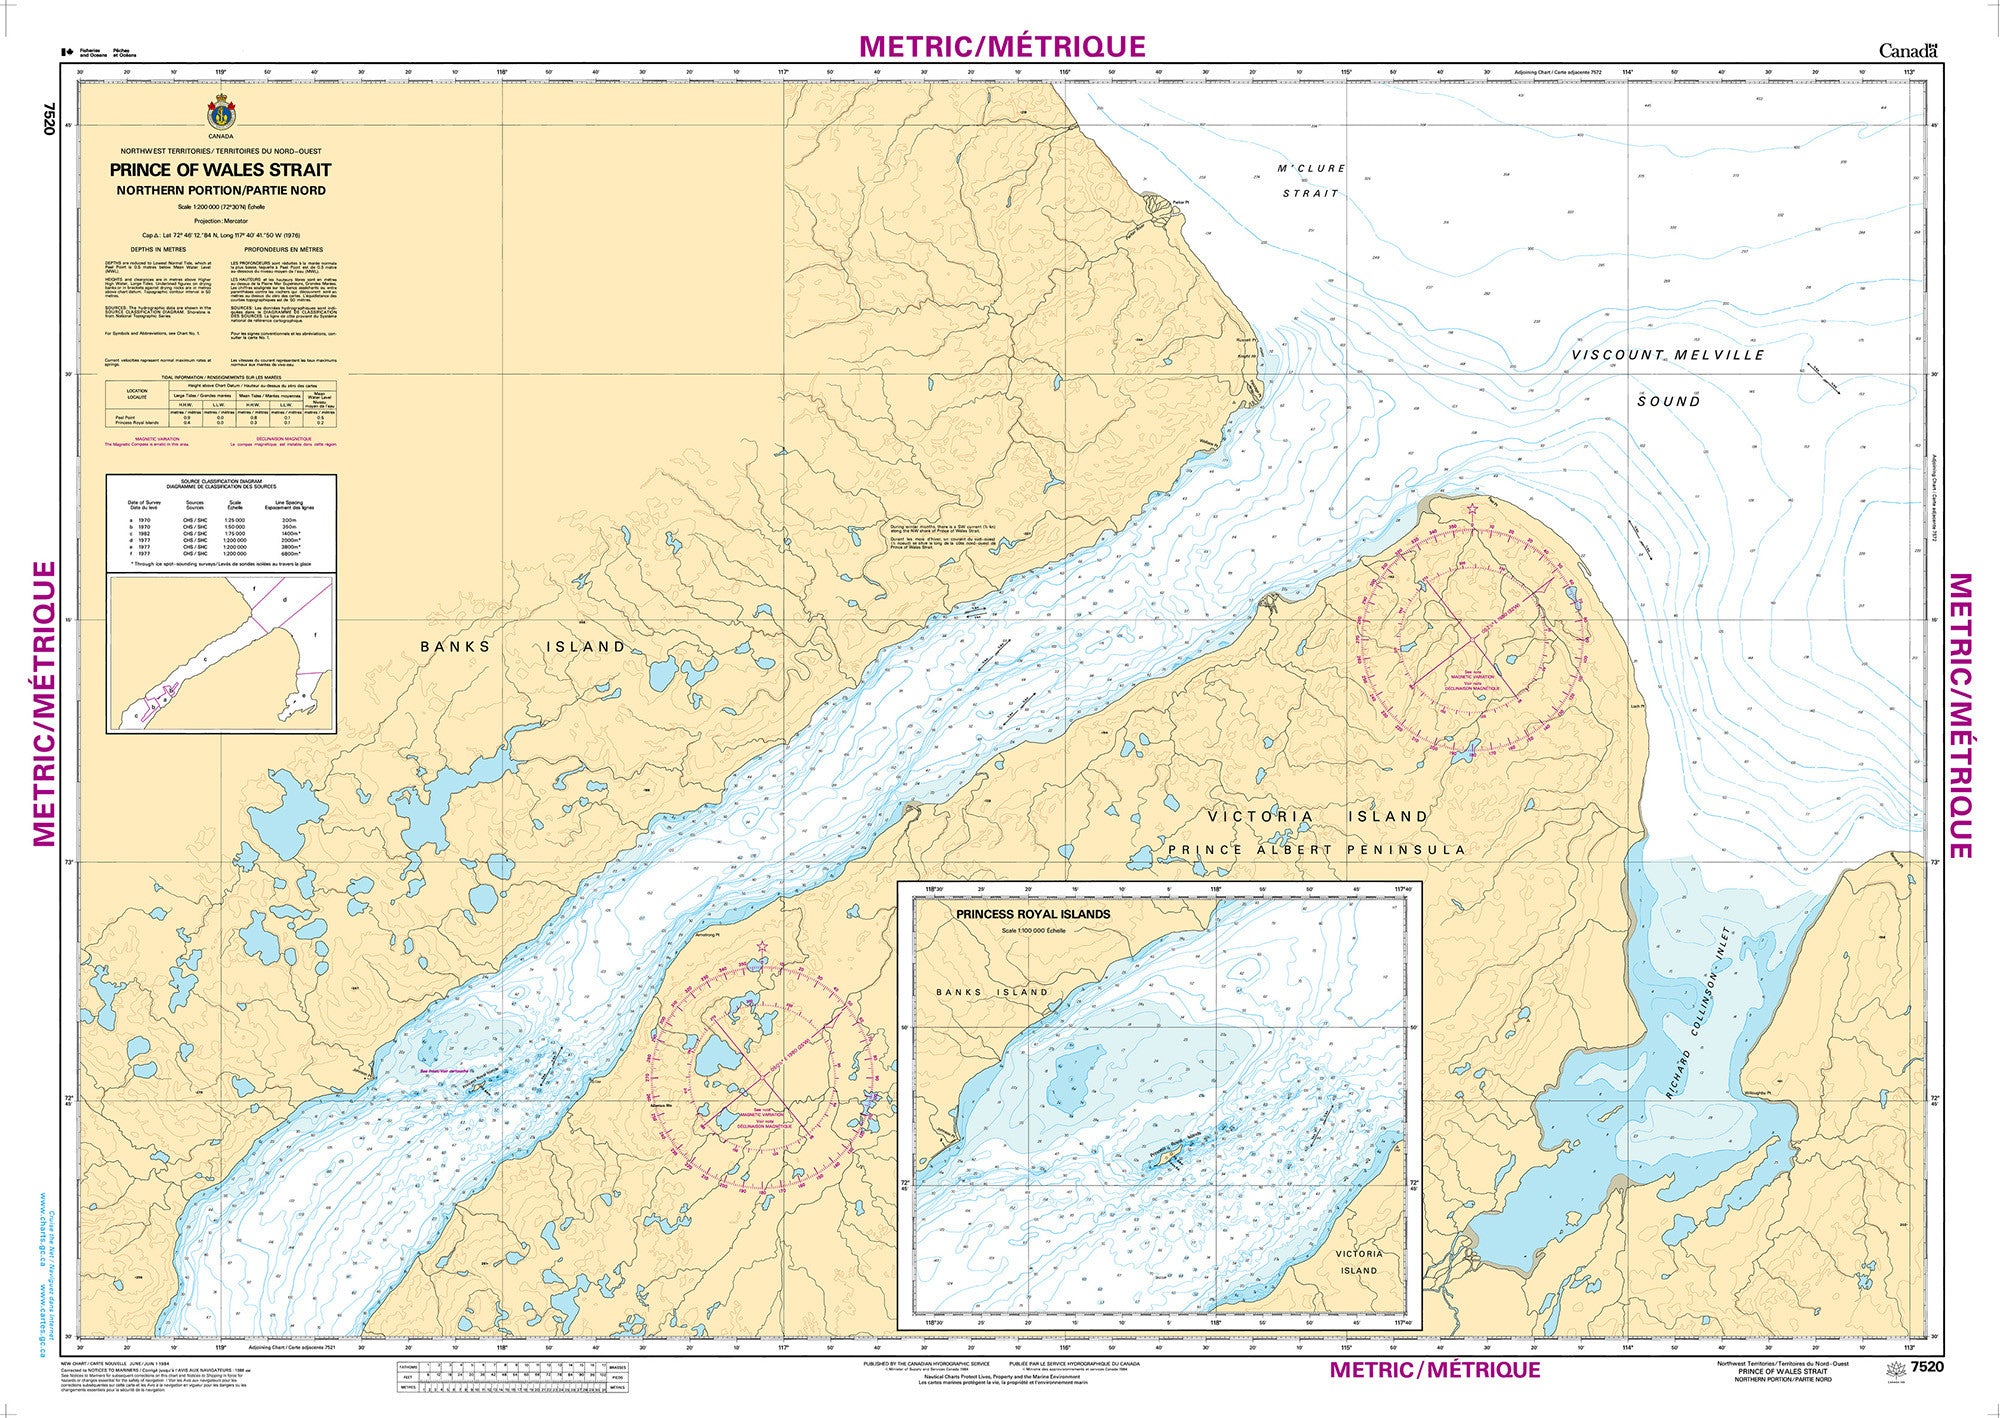 Canadian Hydrographic Service Nautical Chart CHS7520: Prince of Wales Strait, Northern Portion/ Partie Nord